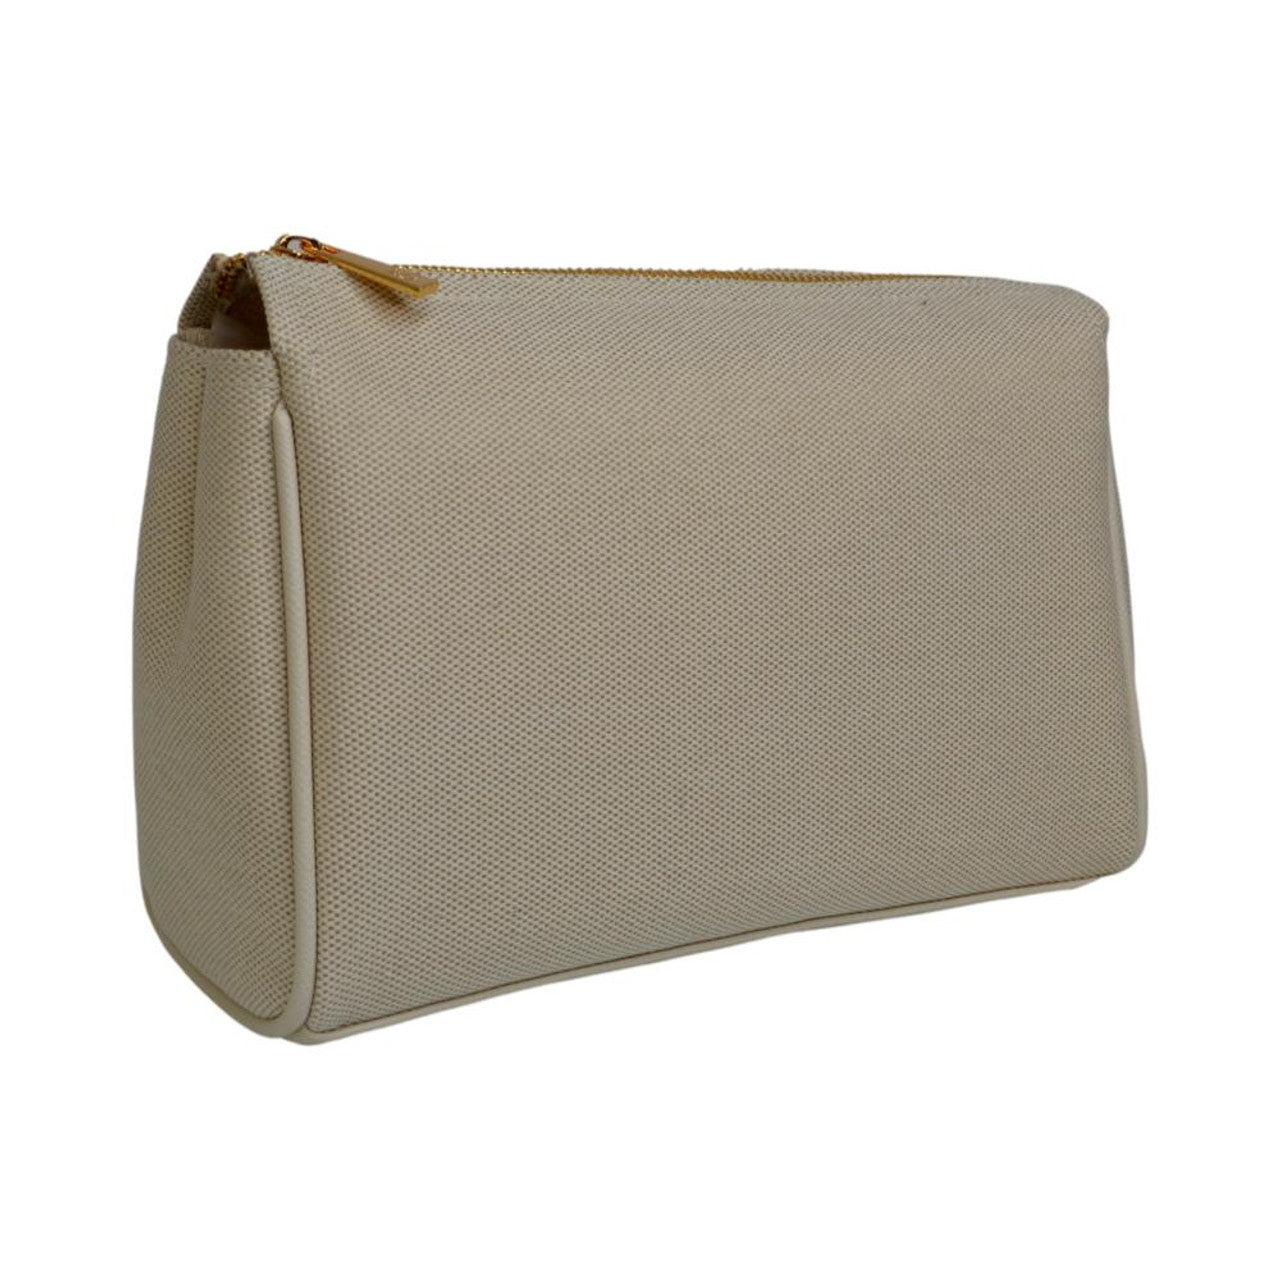 TOILETRY VOYAGE BAG LINEN SAND (Available in 2 Sizes)